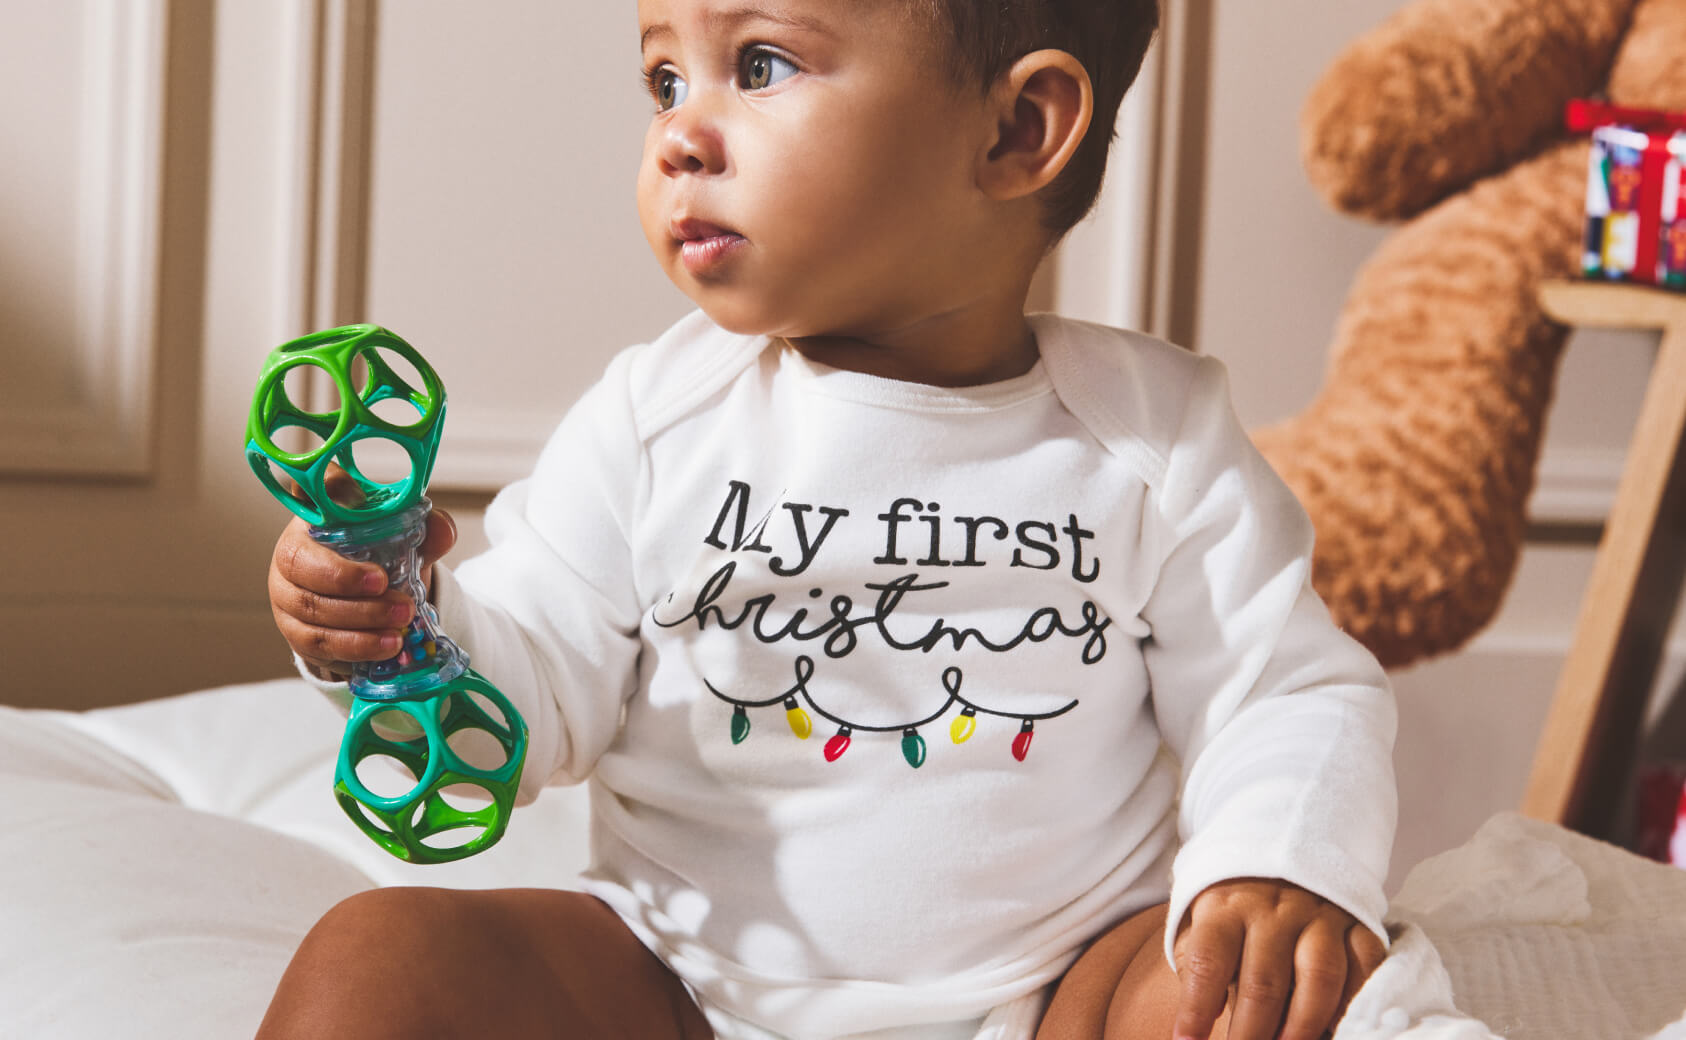 A baby holding a green rattle and wearing a white onesie that says "My First Christmas".